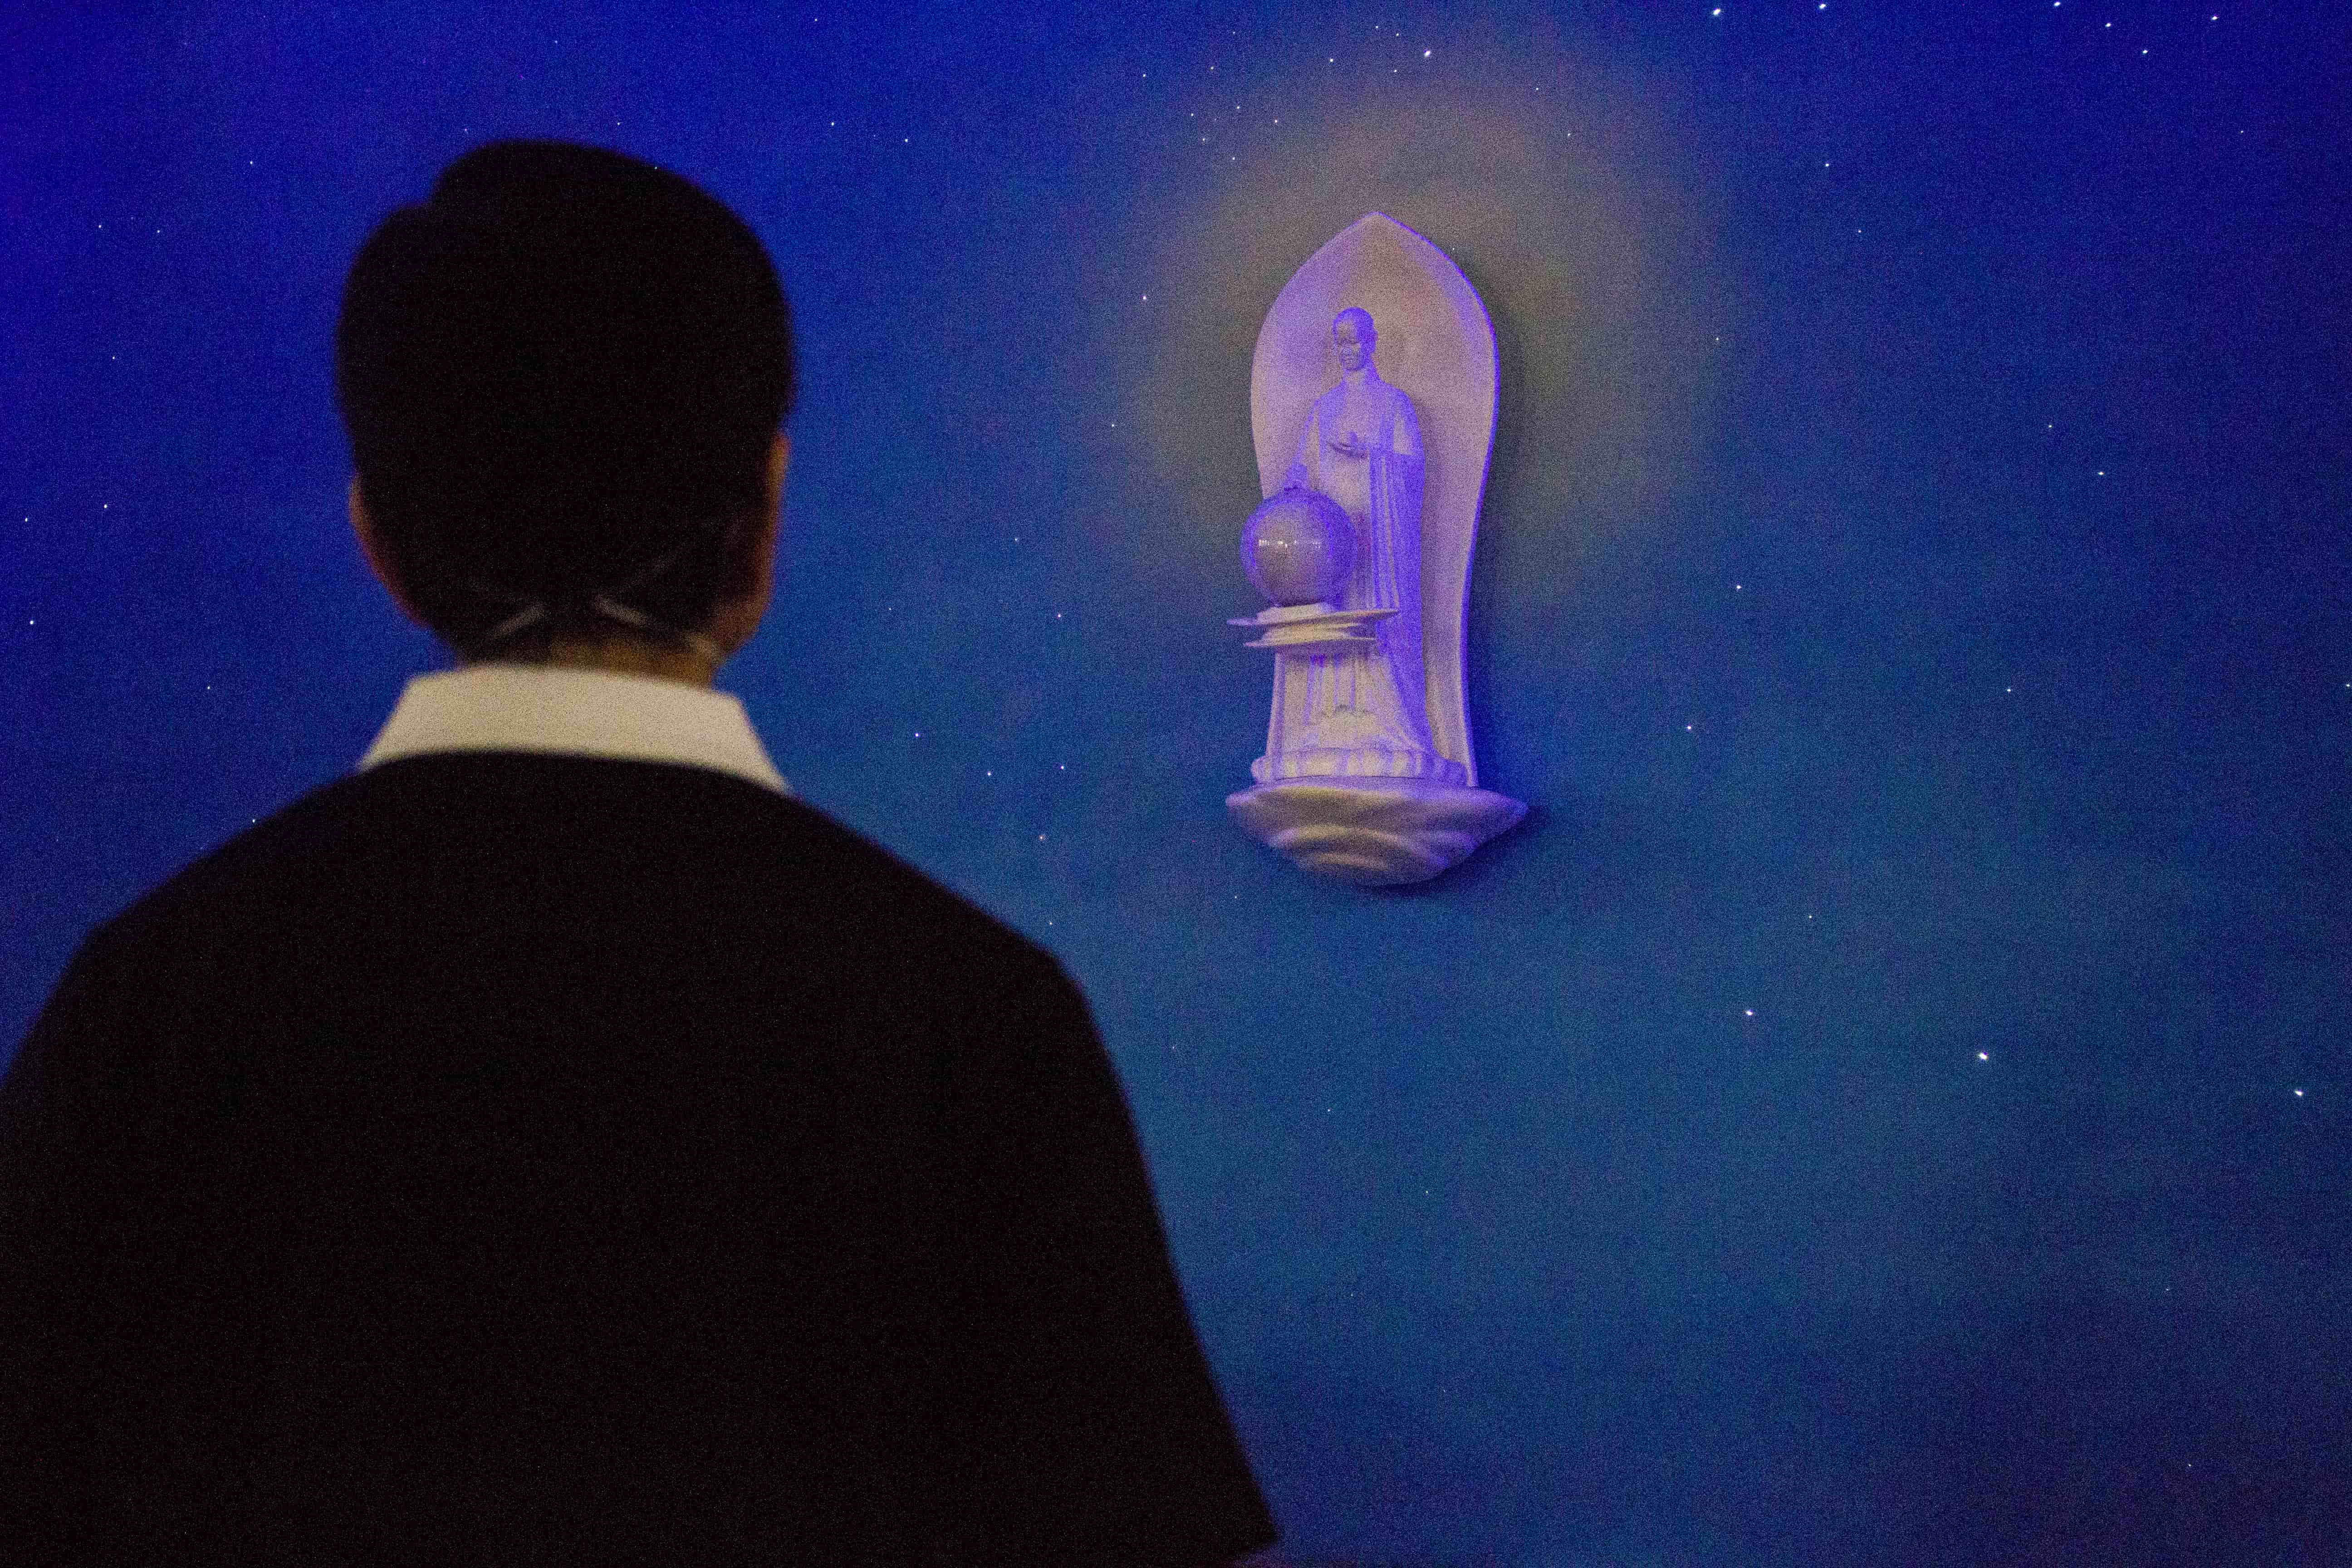 A volunteer admires the statue of Buddha amidst a reproduction of a starry night sky at the Jing Si Hall. 【Photo by Matt Serrano】